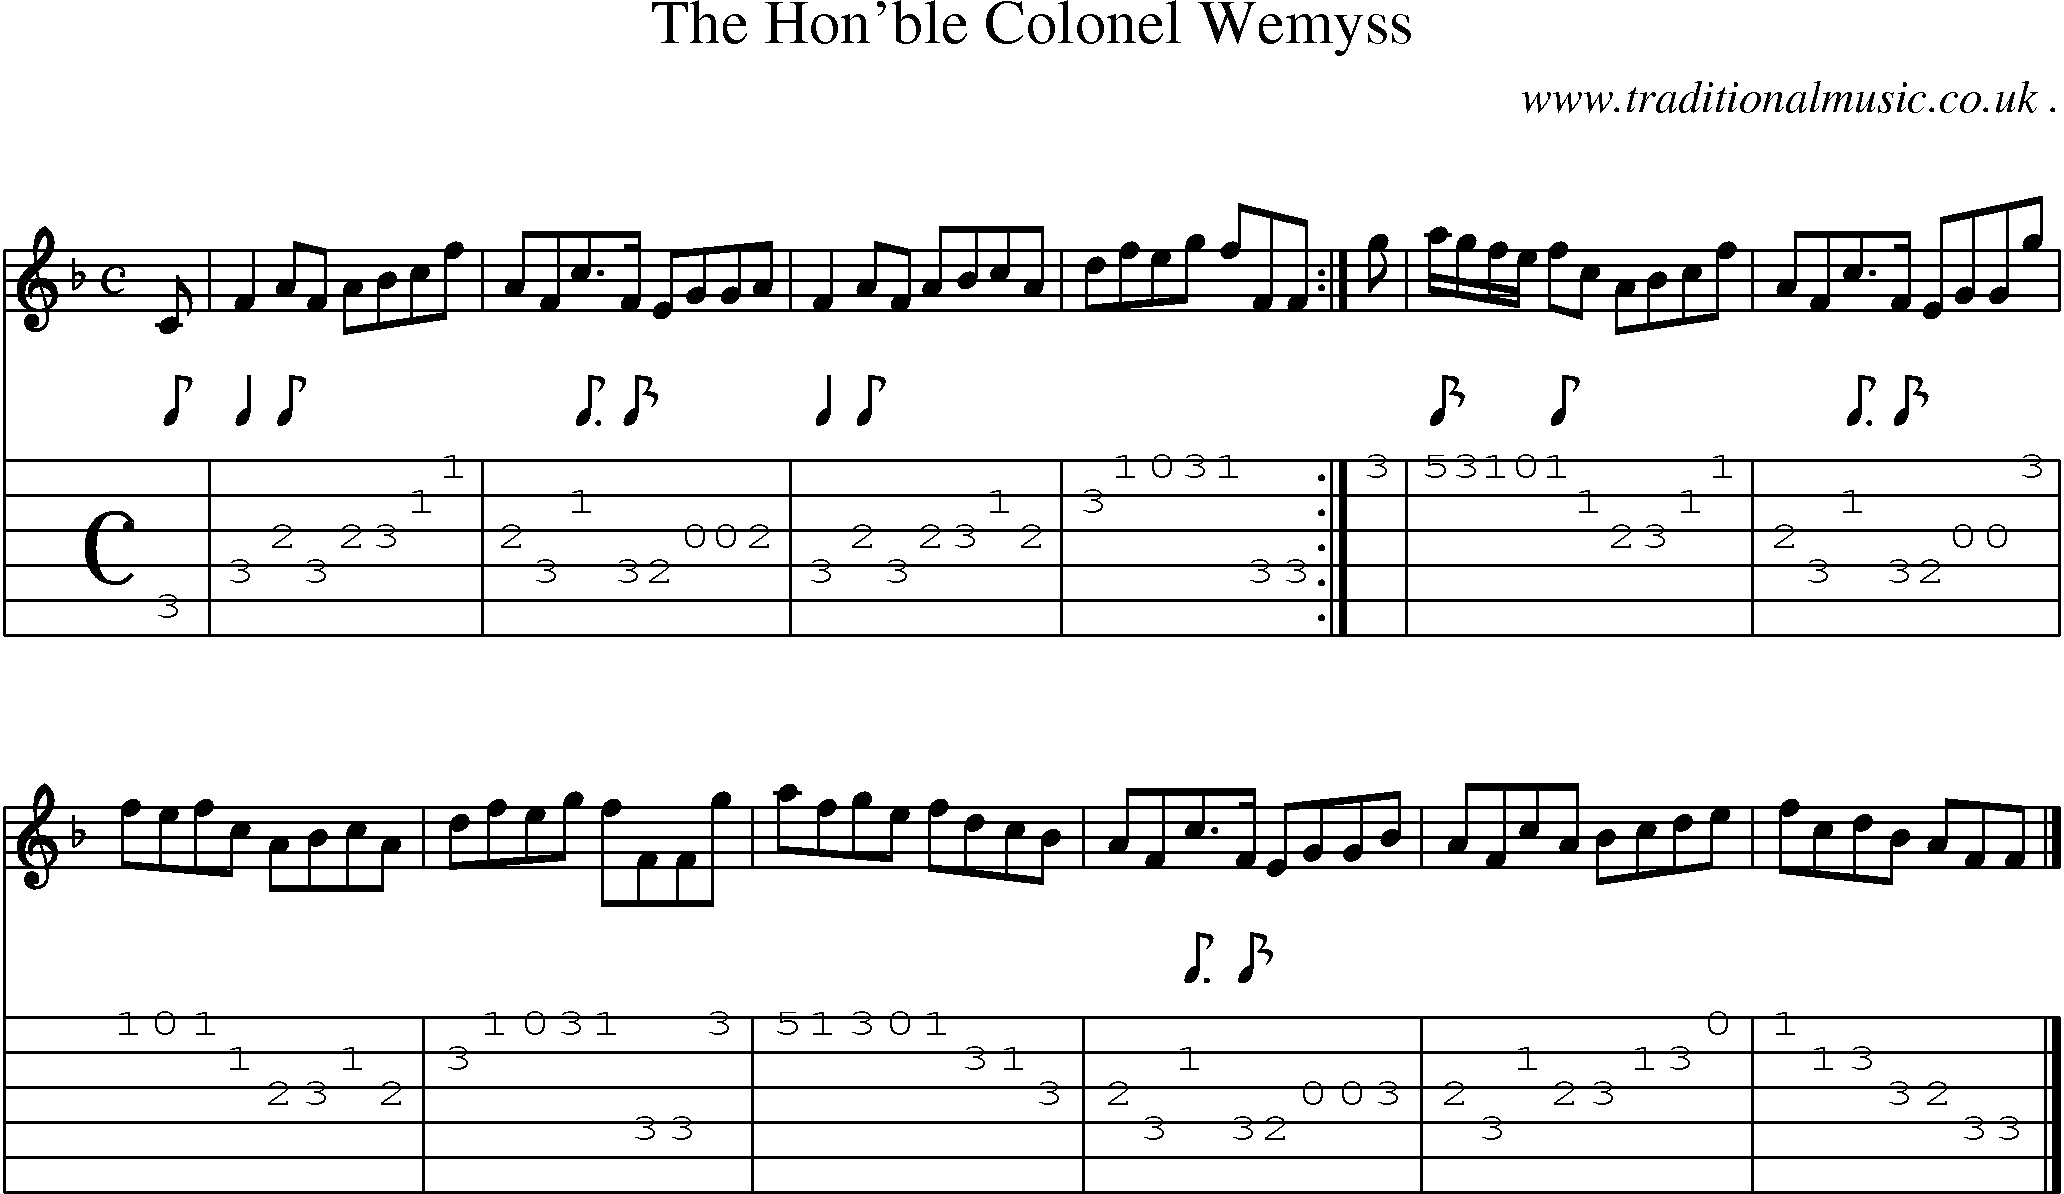 Sheet-music  score, Chords and Guitar Tabs for The Honble Colonel Wemyss